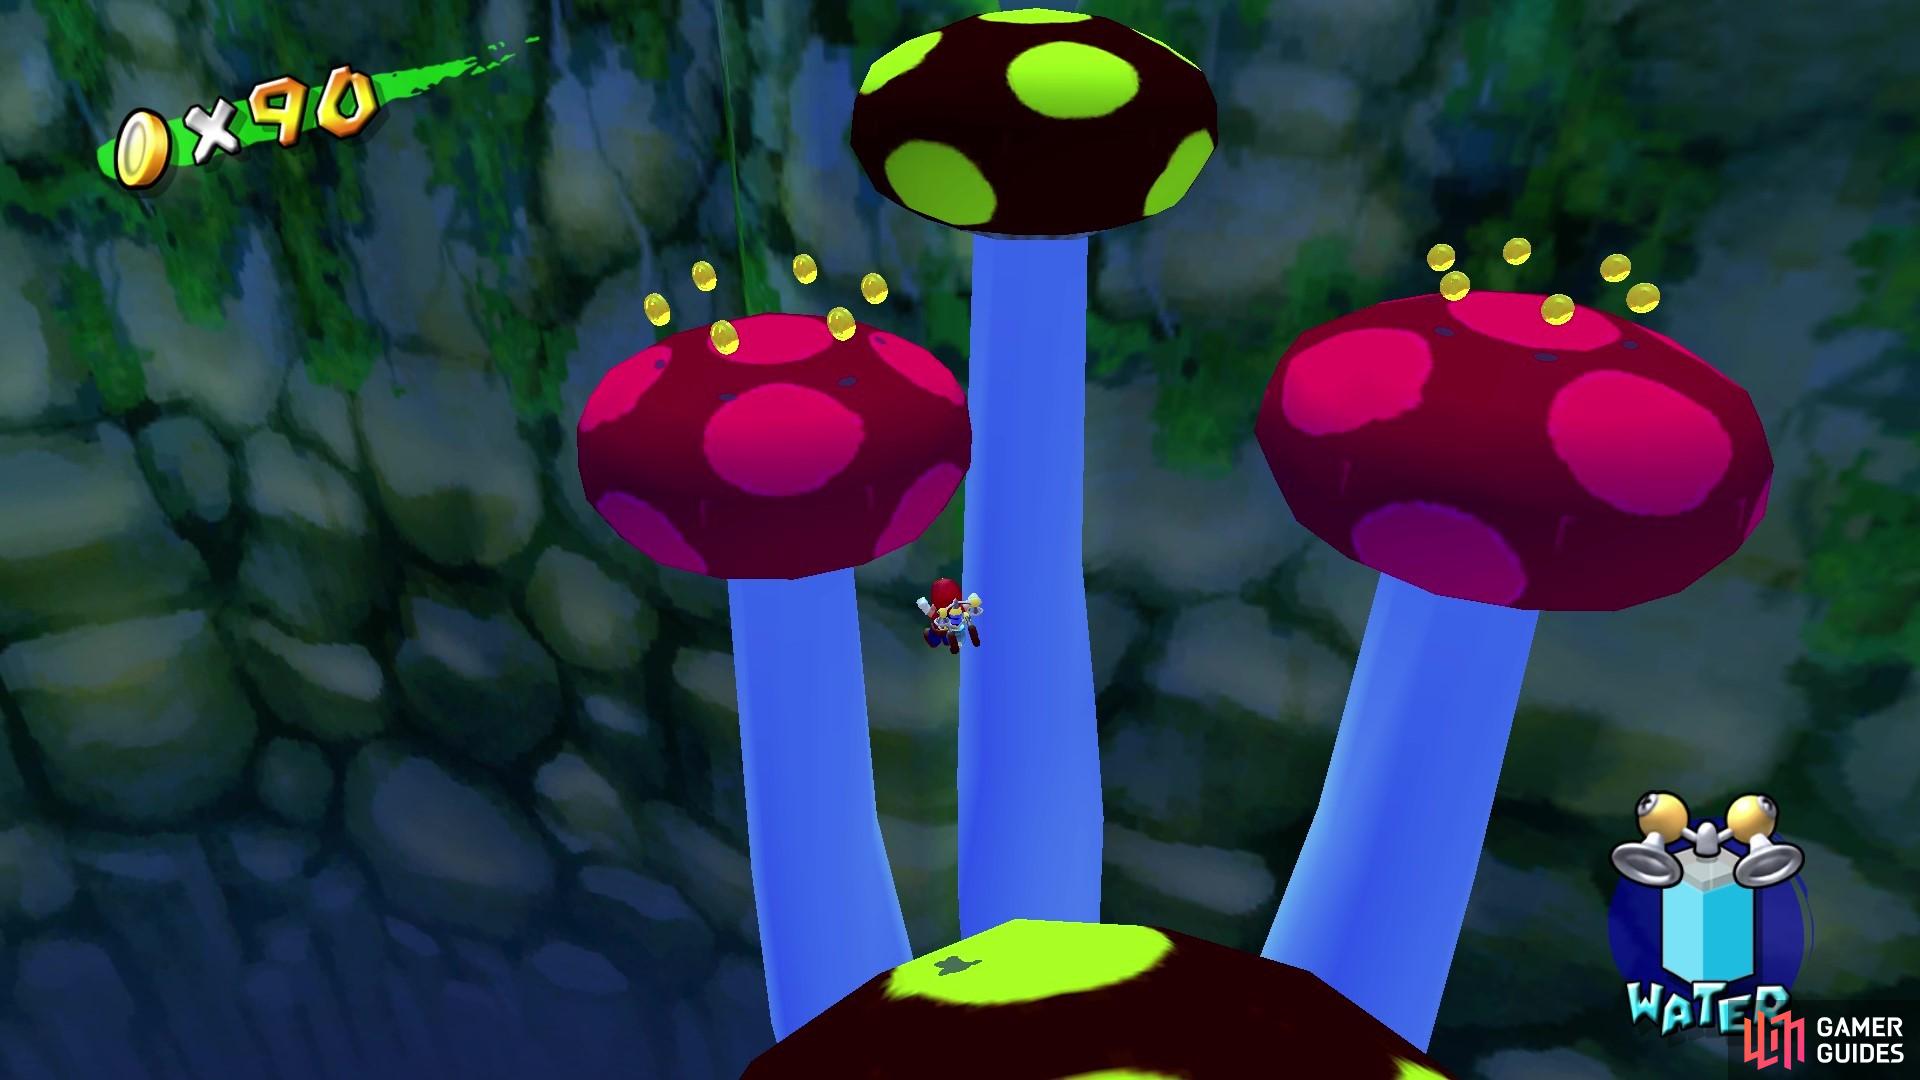 There’s 40 coins to grab on the toadstools. 